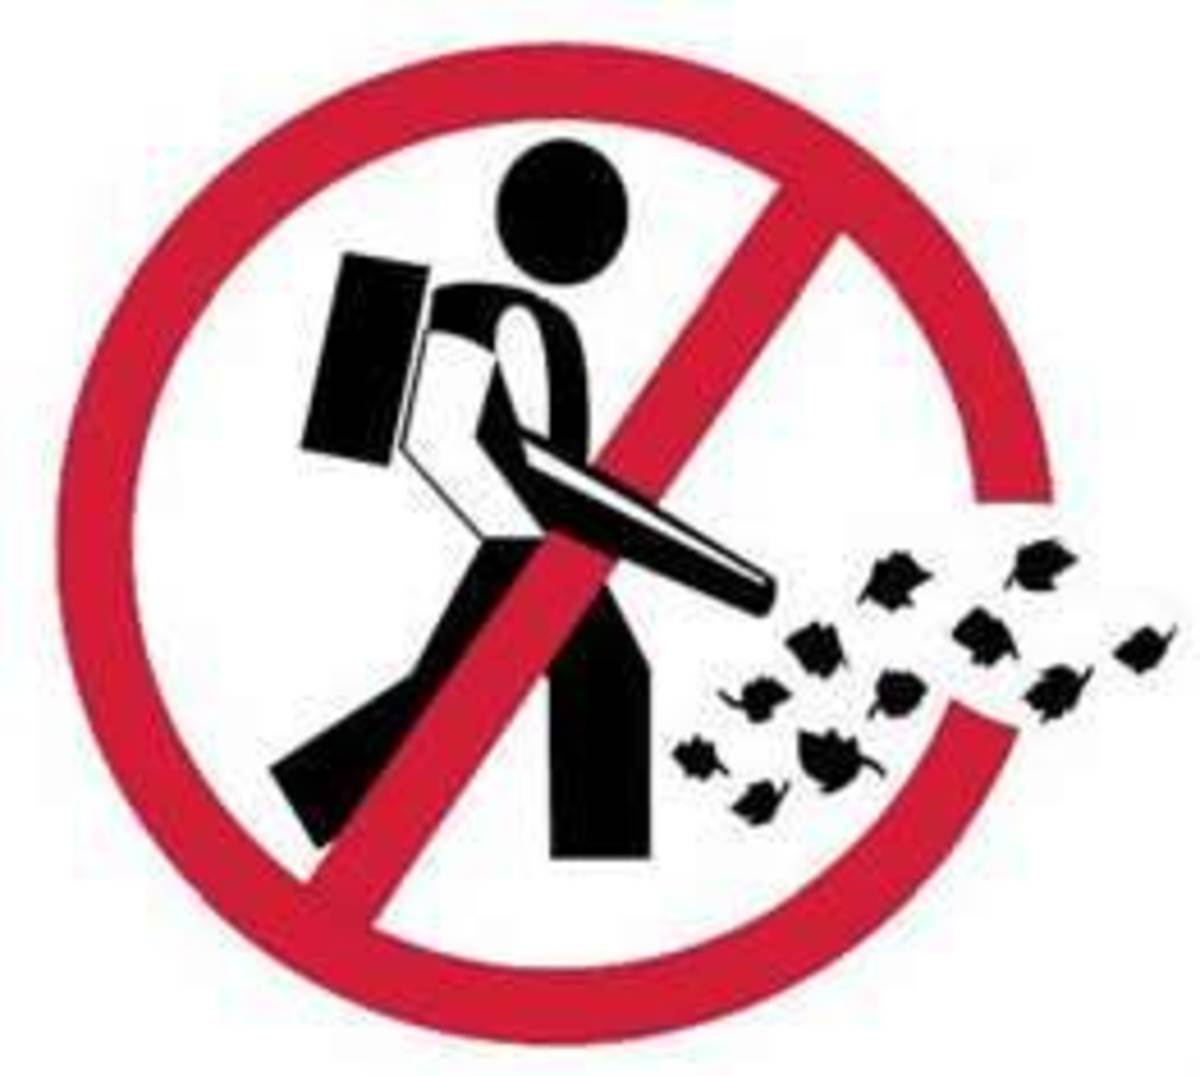 Sign showing that leaf blowers are banned in an area.